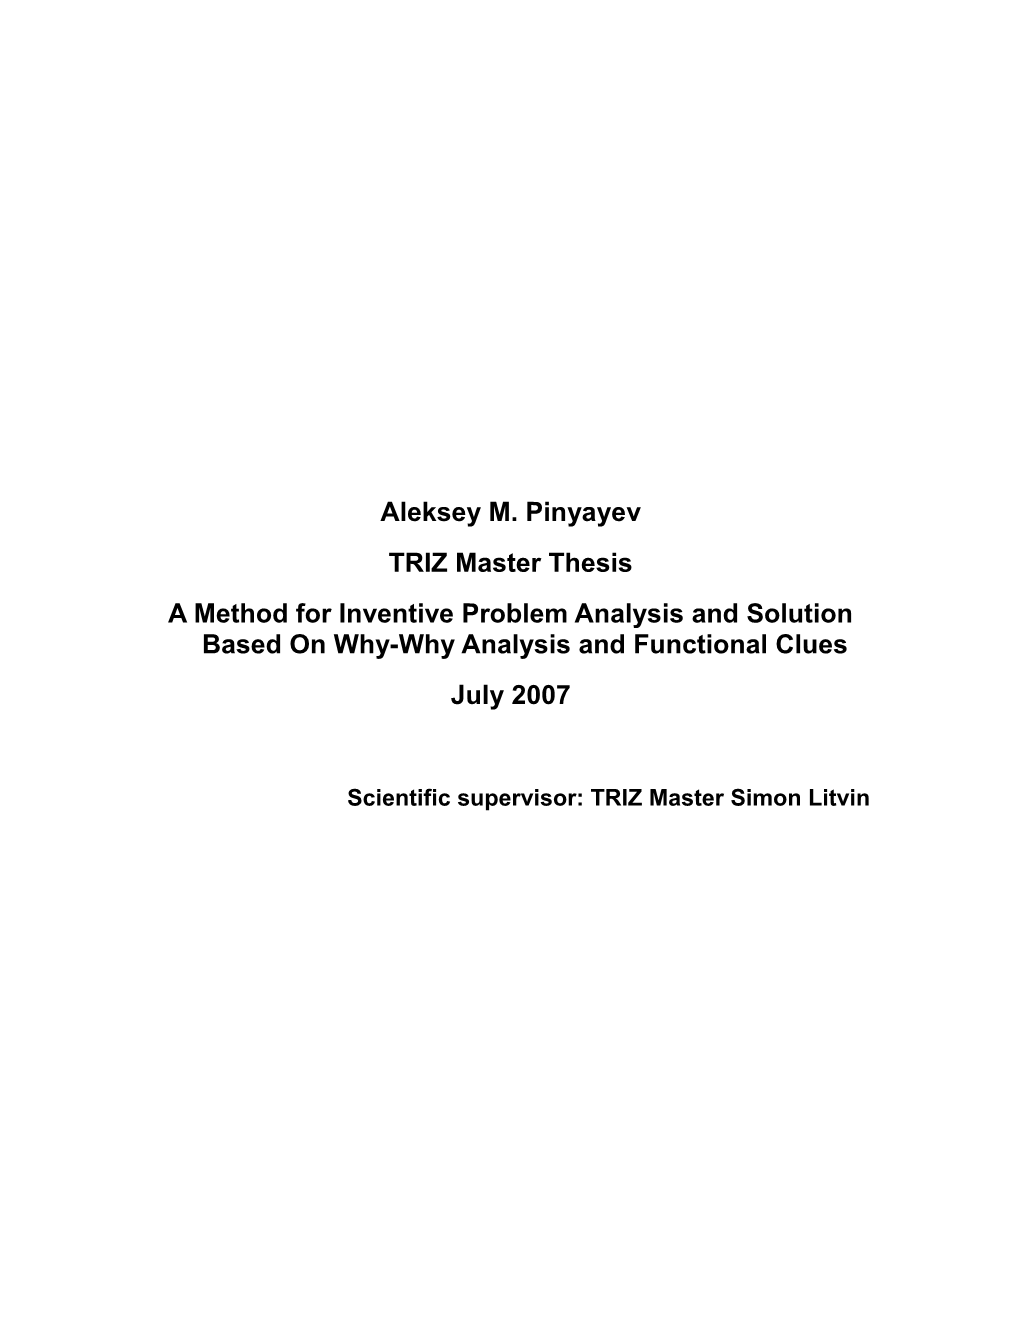 Why-Why Analysis Application for Inventive Problem Definition